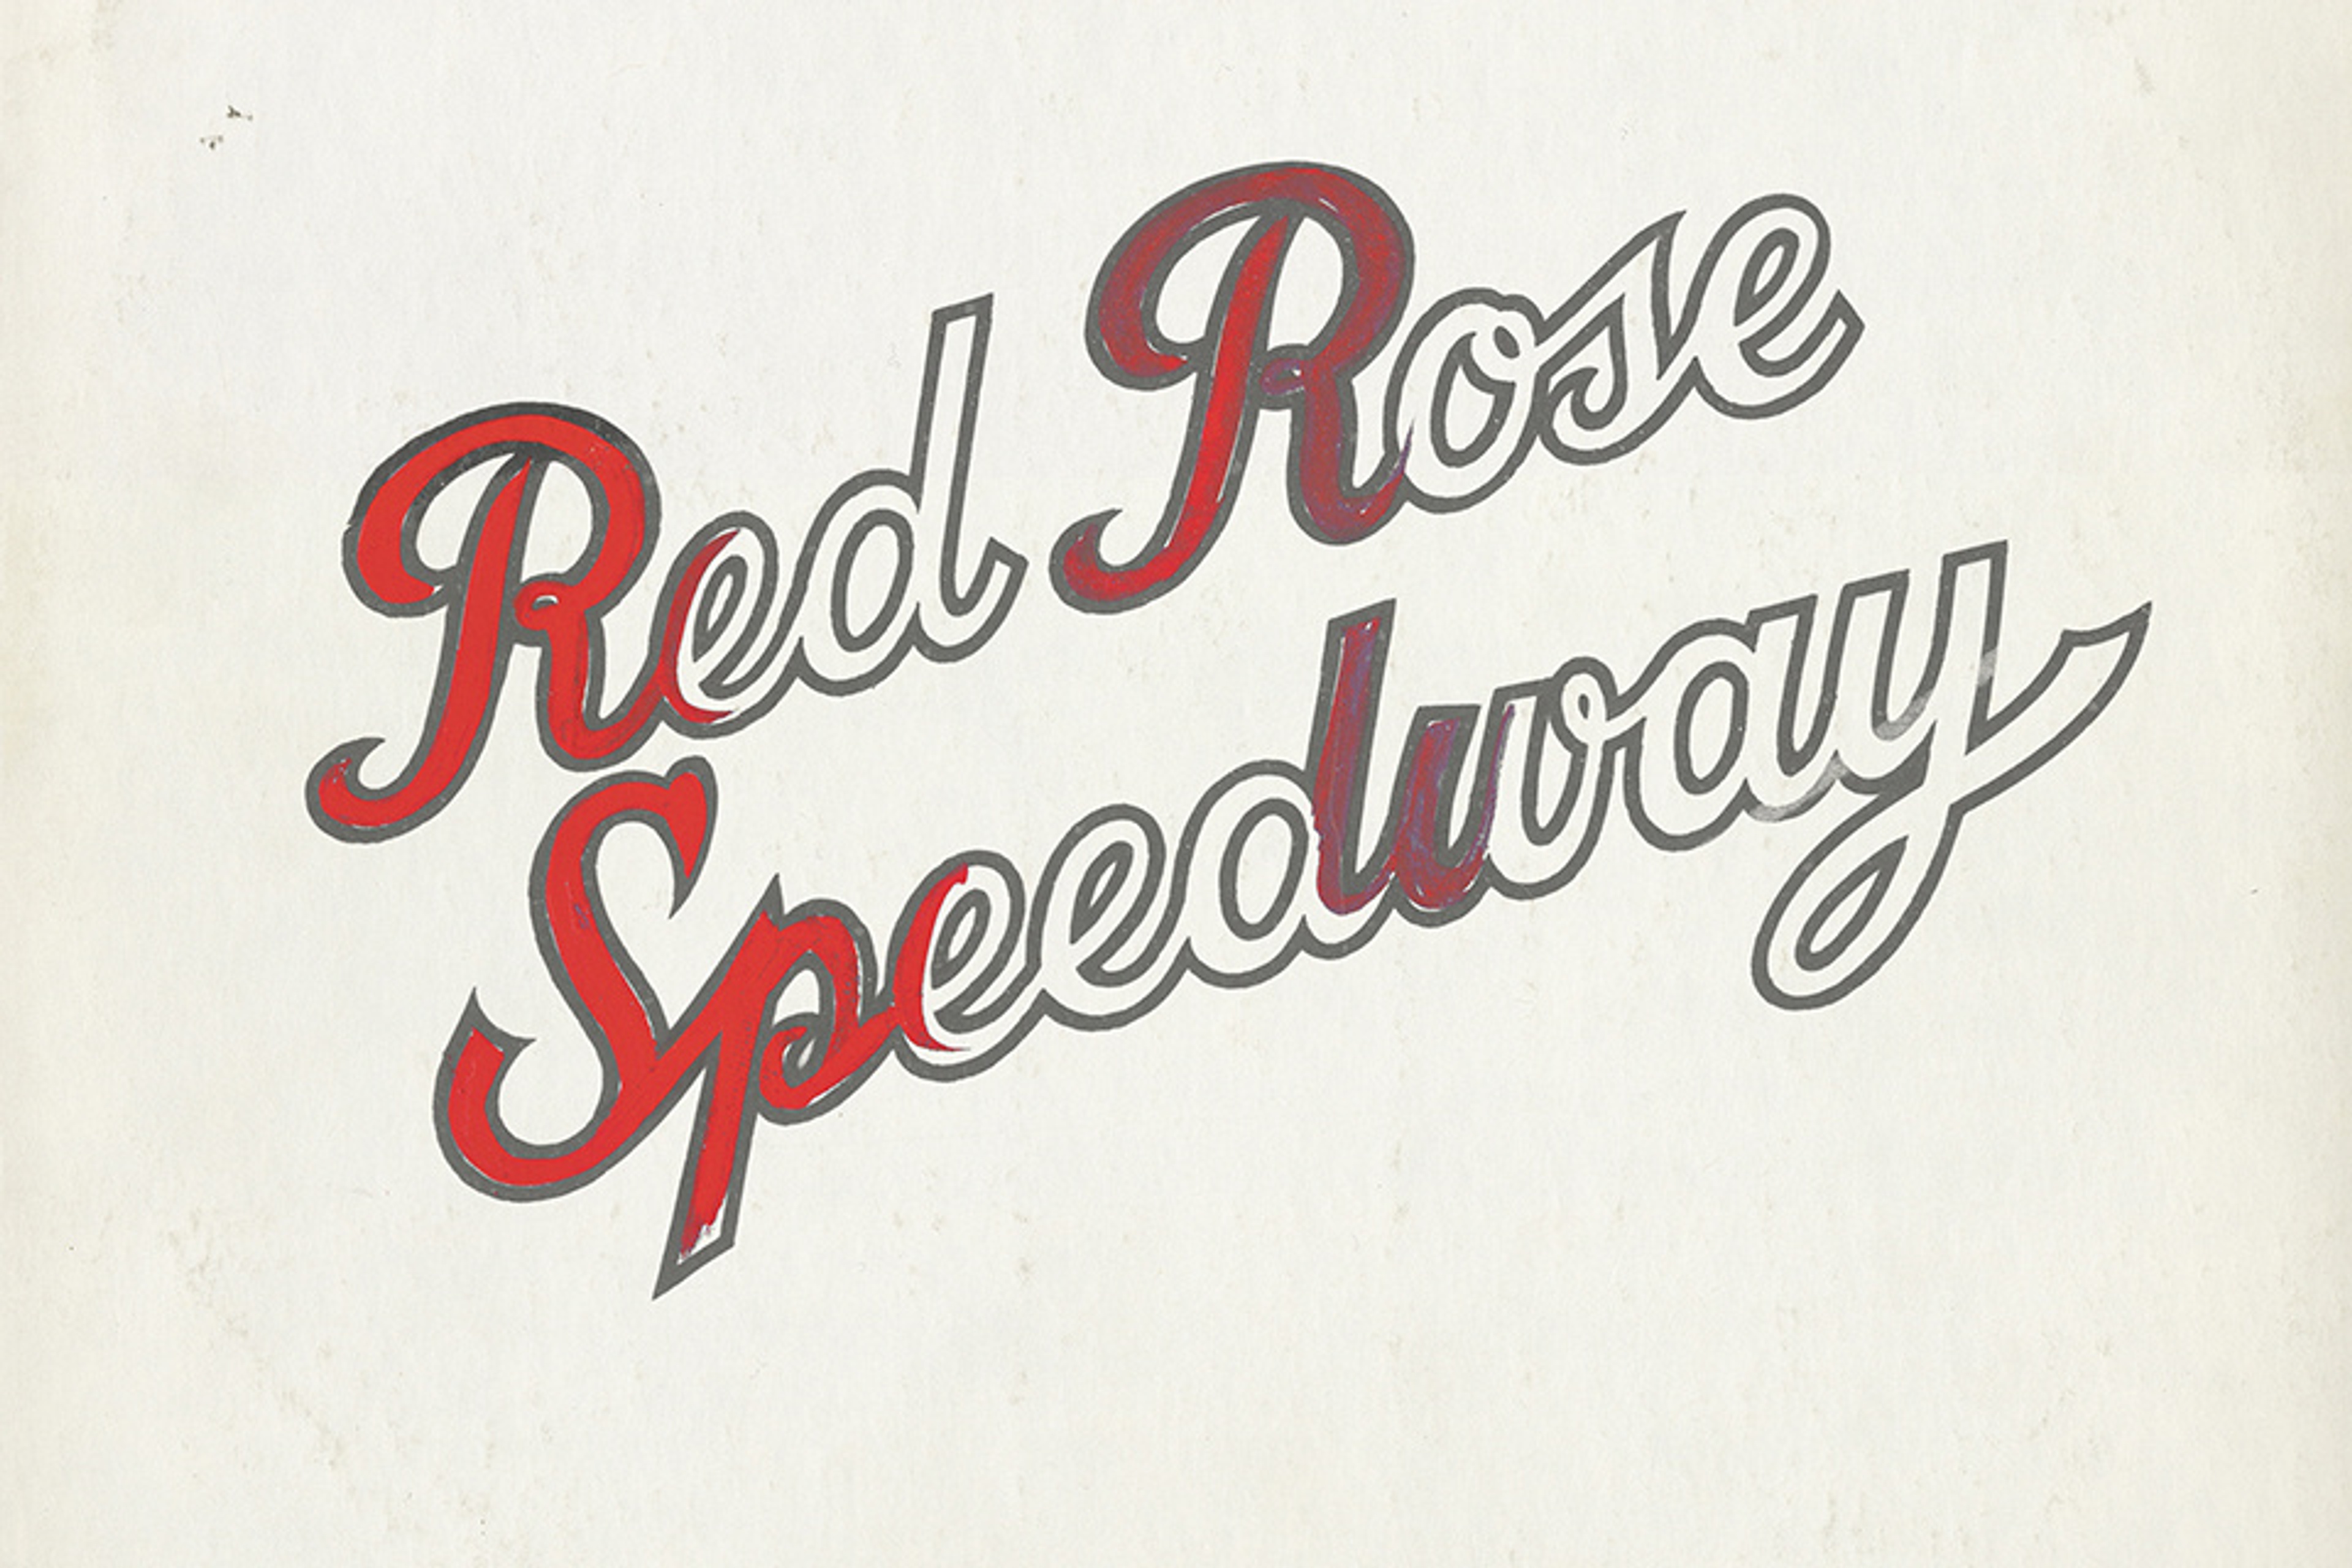 Red Rose Speedway “The Double Album”